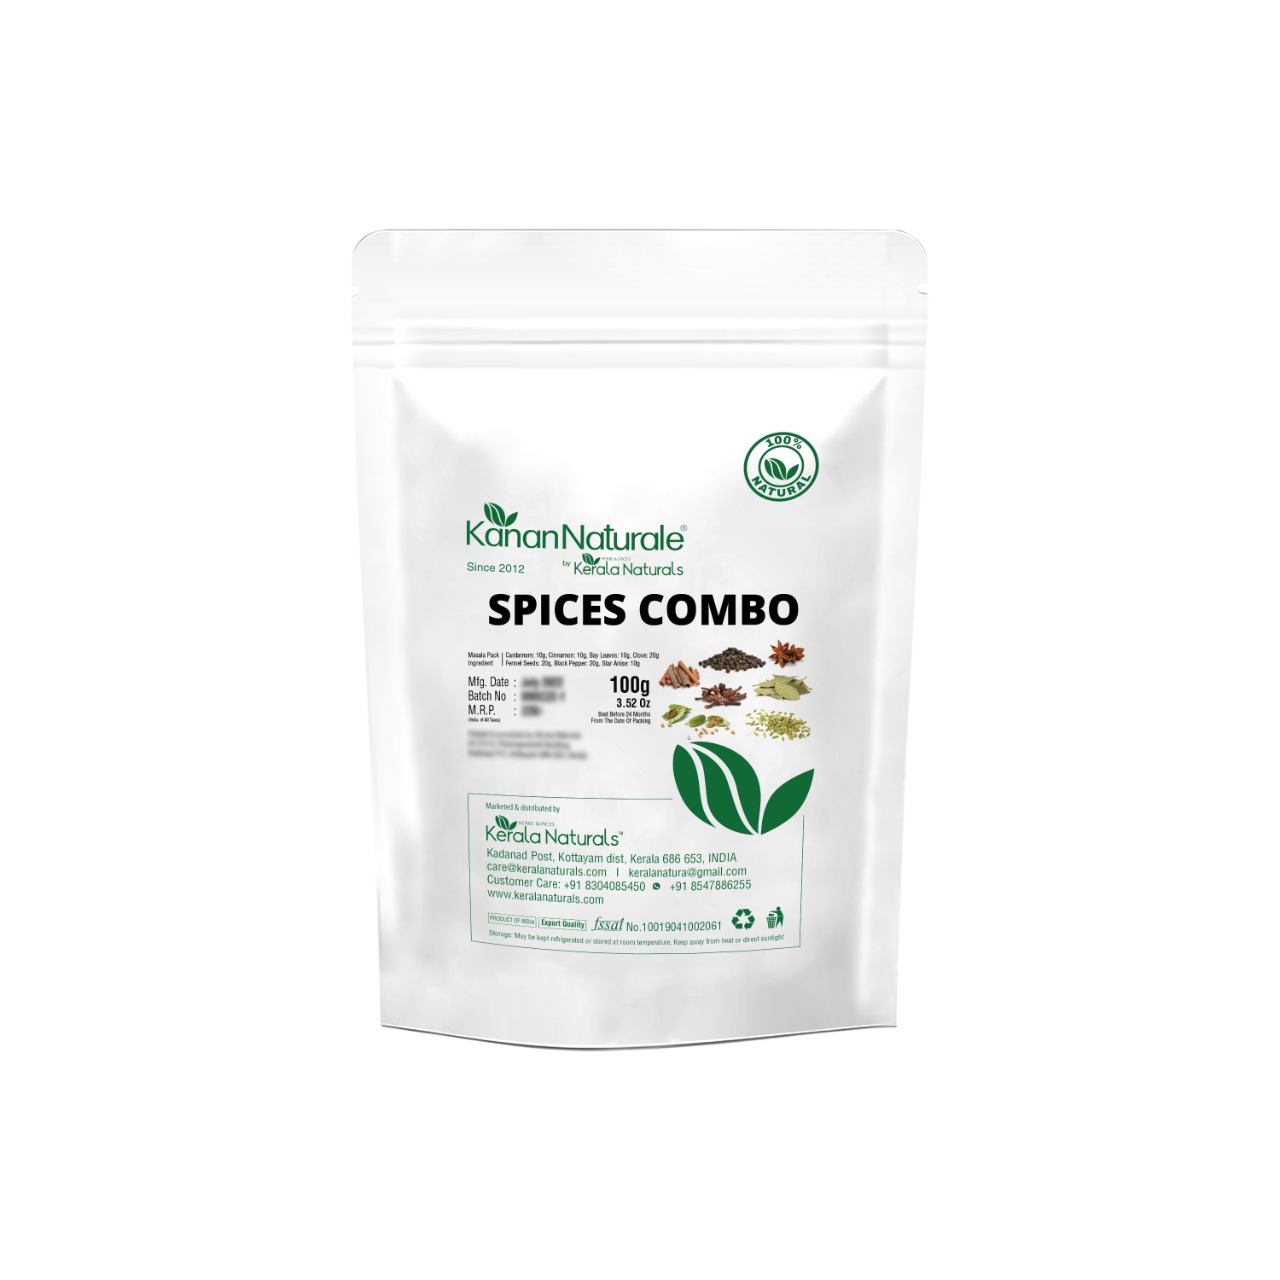 Kanan Naturale Spices Combo